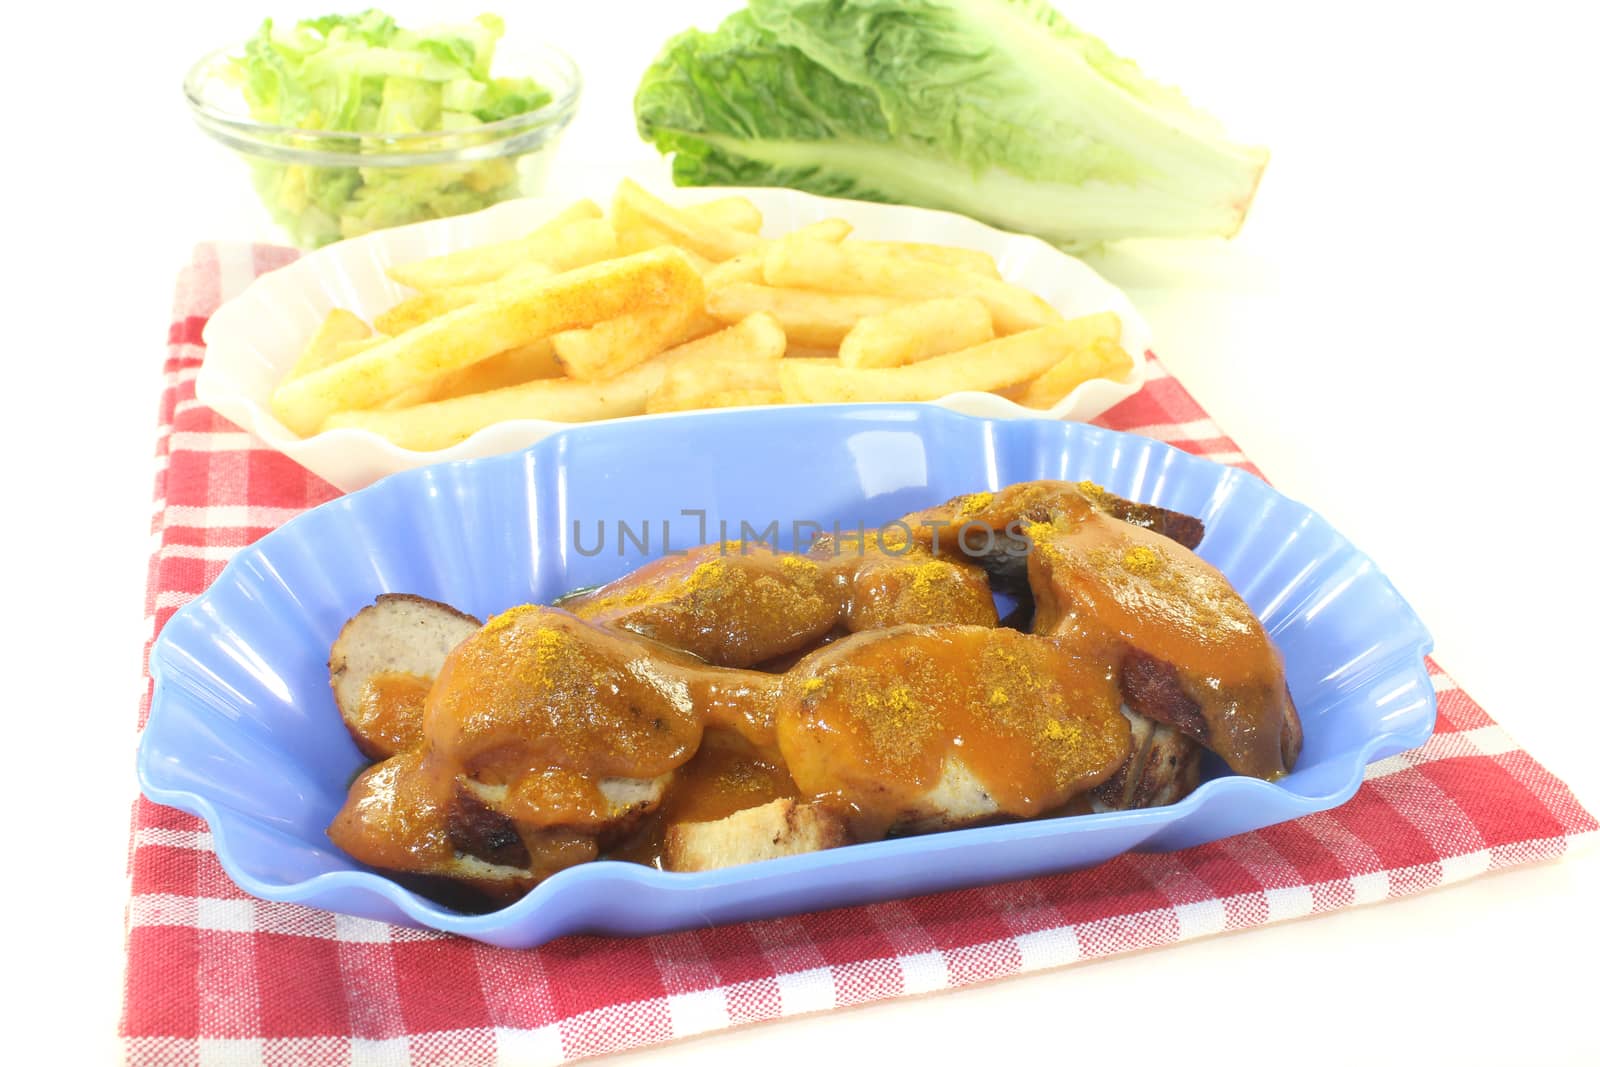 Currywurst with french fries on a napkin by discovery